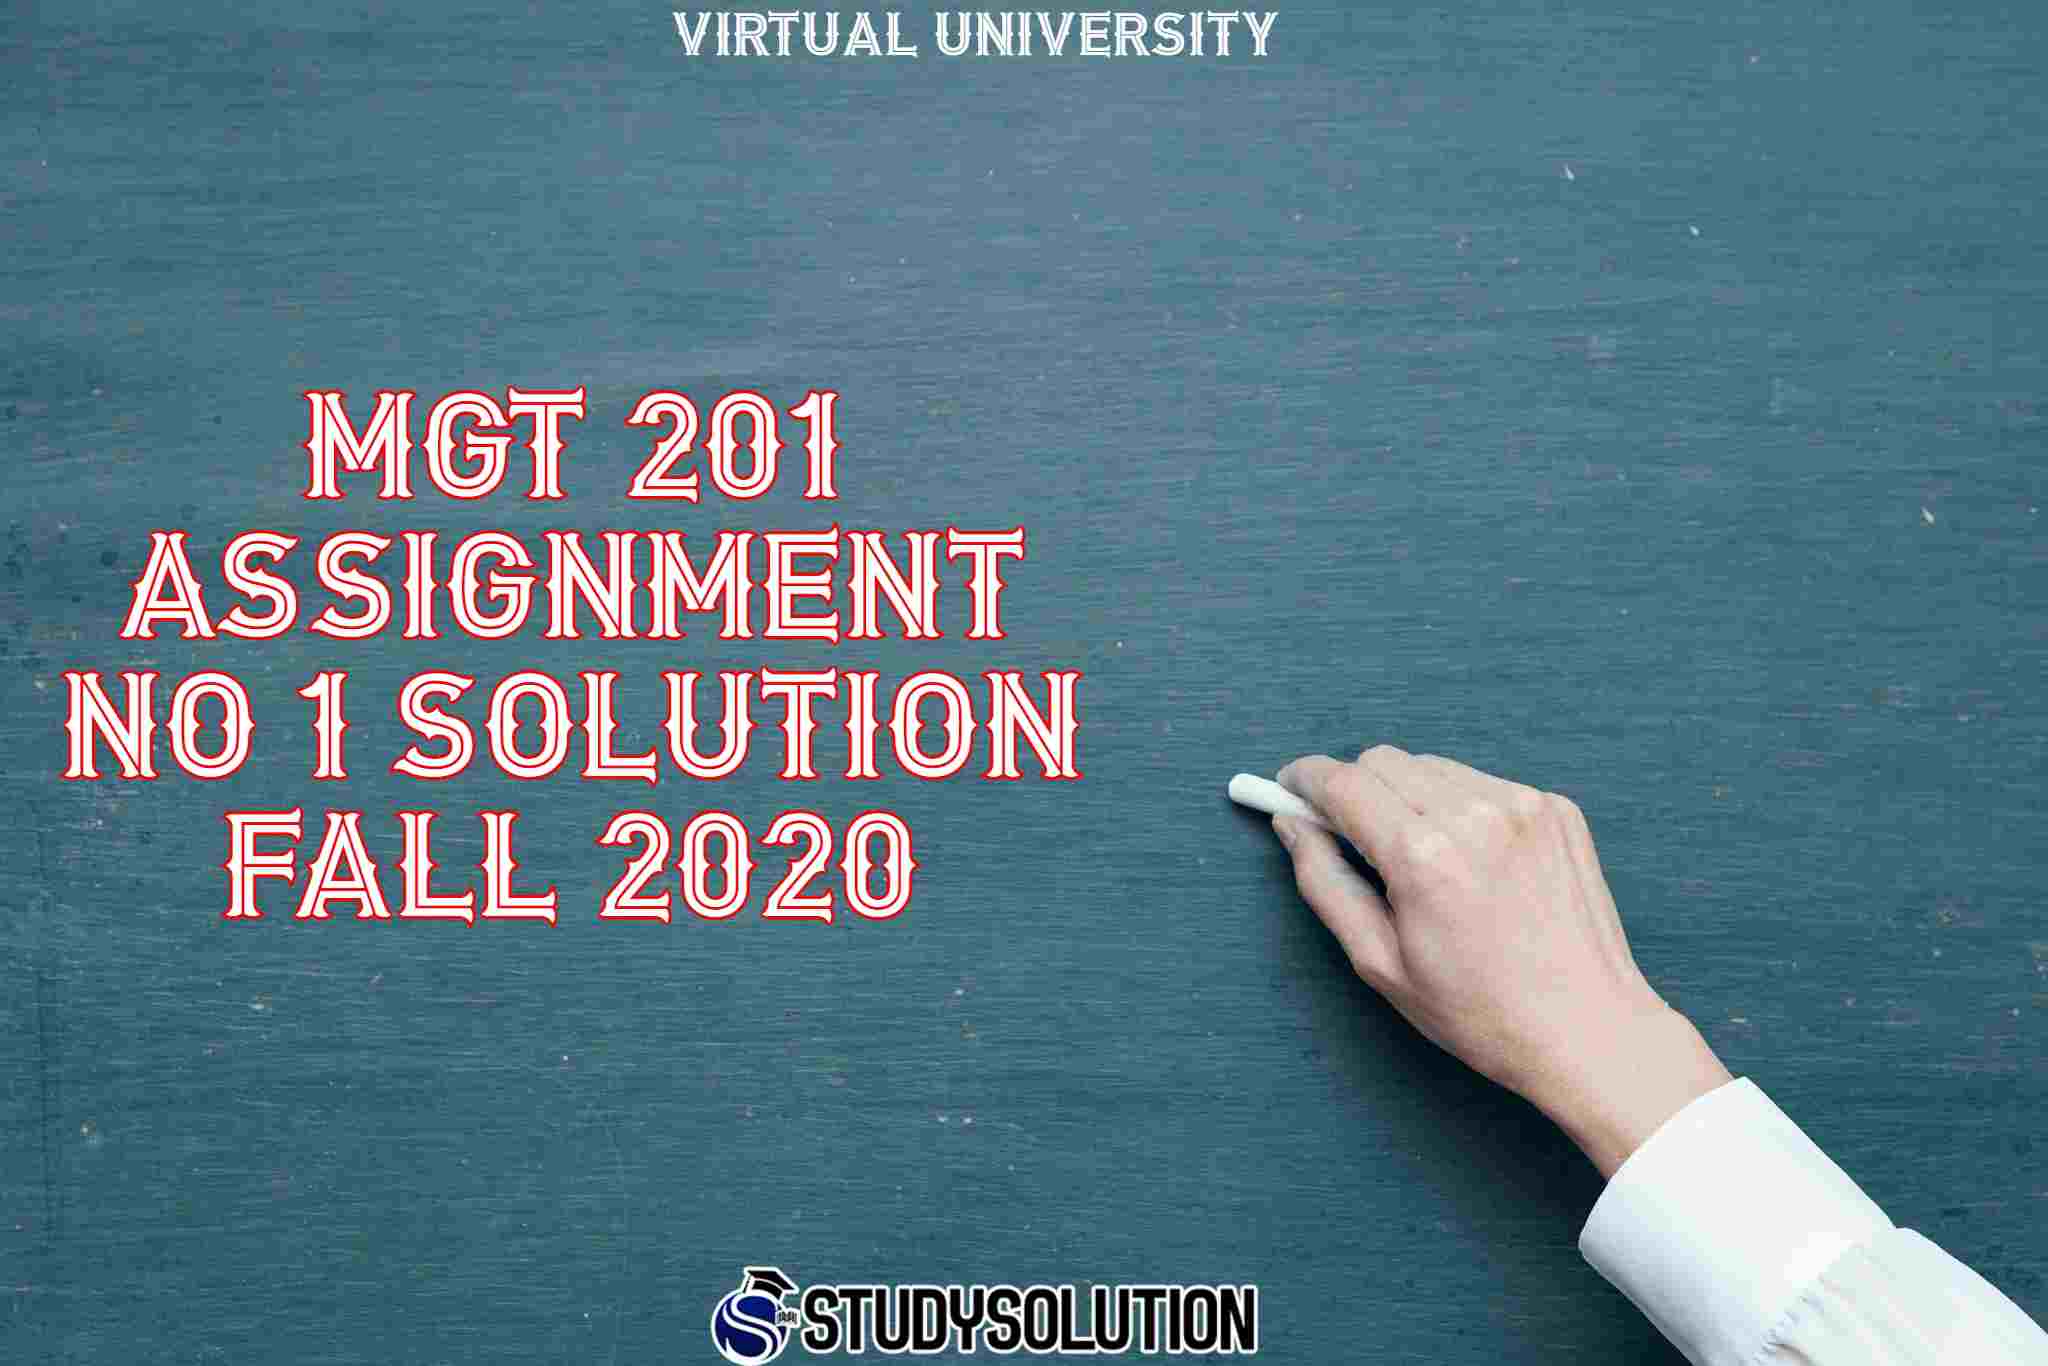 MGT 201 Assignment NO 1 Solution Fall 2020